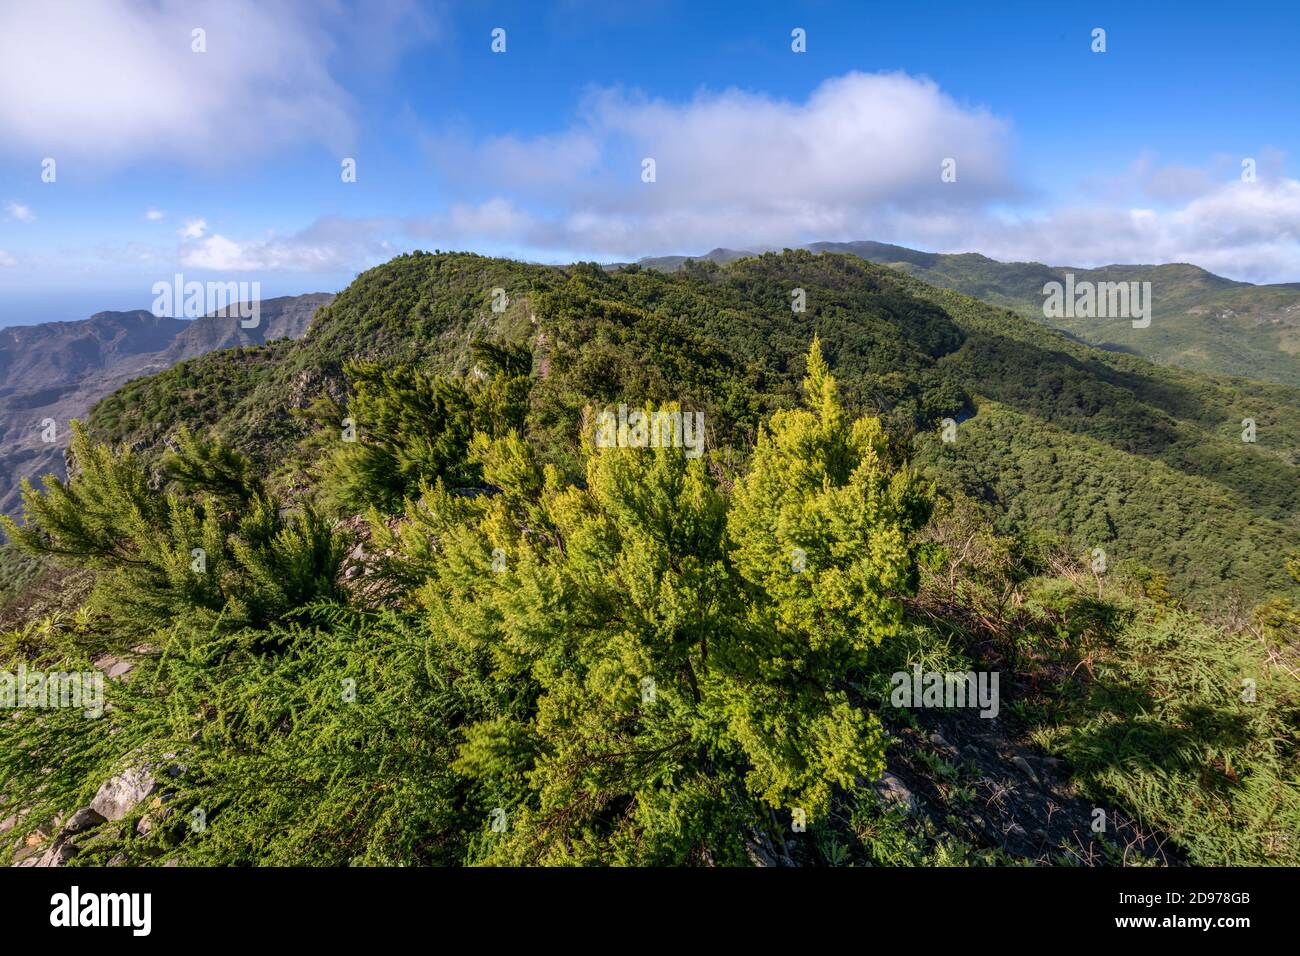 Windy and humid ridges swept by the trade winds overlooking the laurel forest of La Gomera Island, Garajonay National Park, Canary Islands Stock Photo